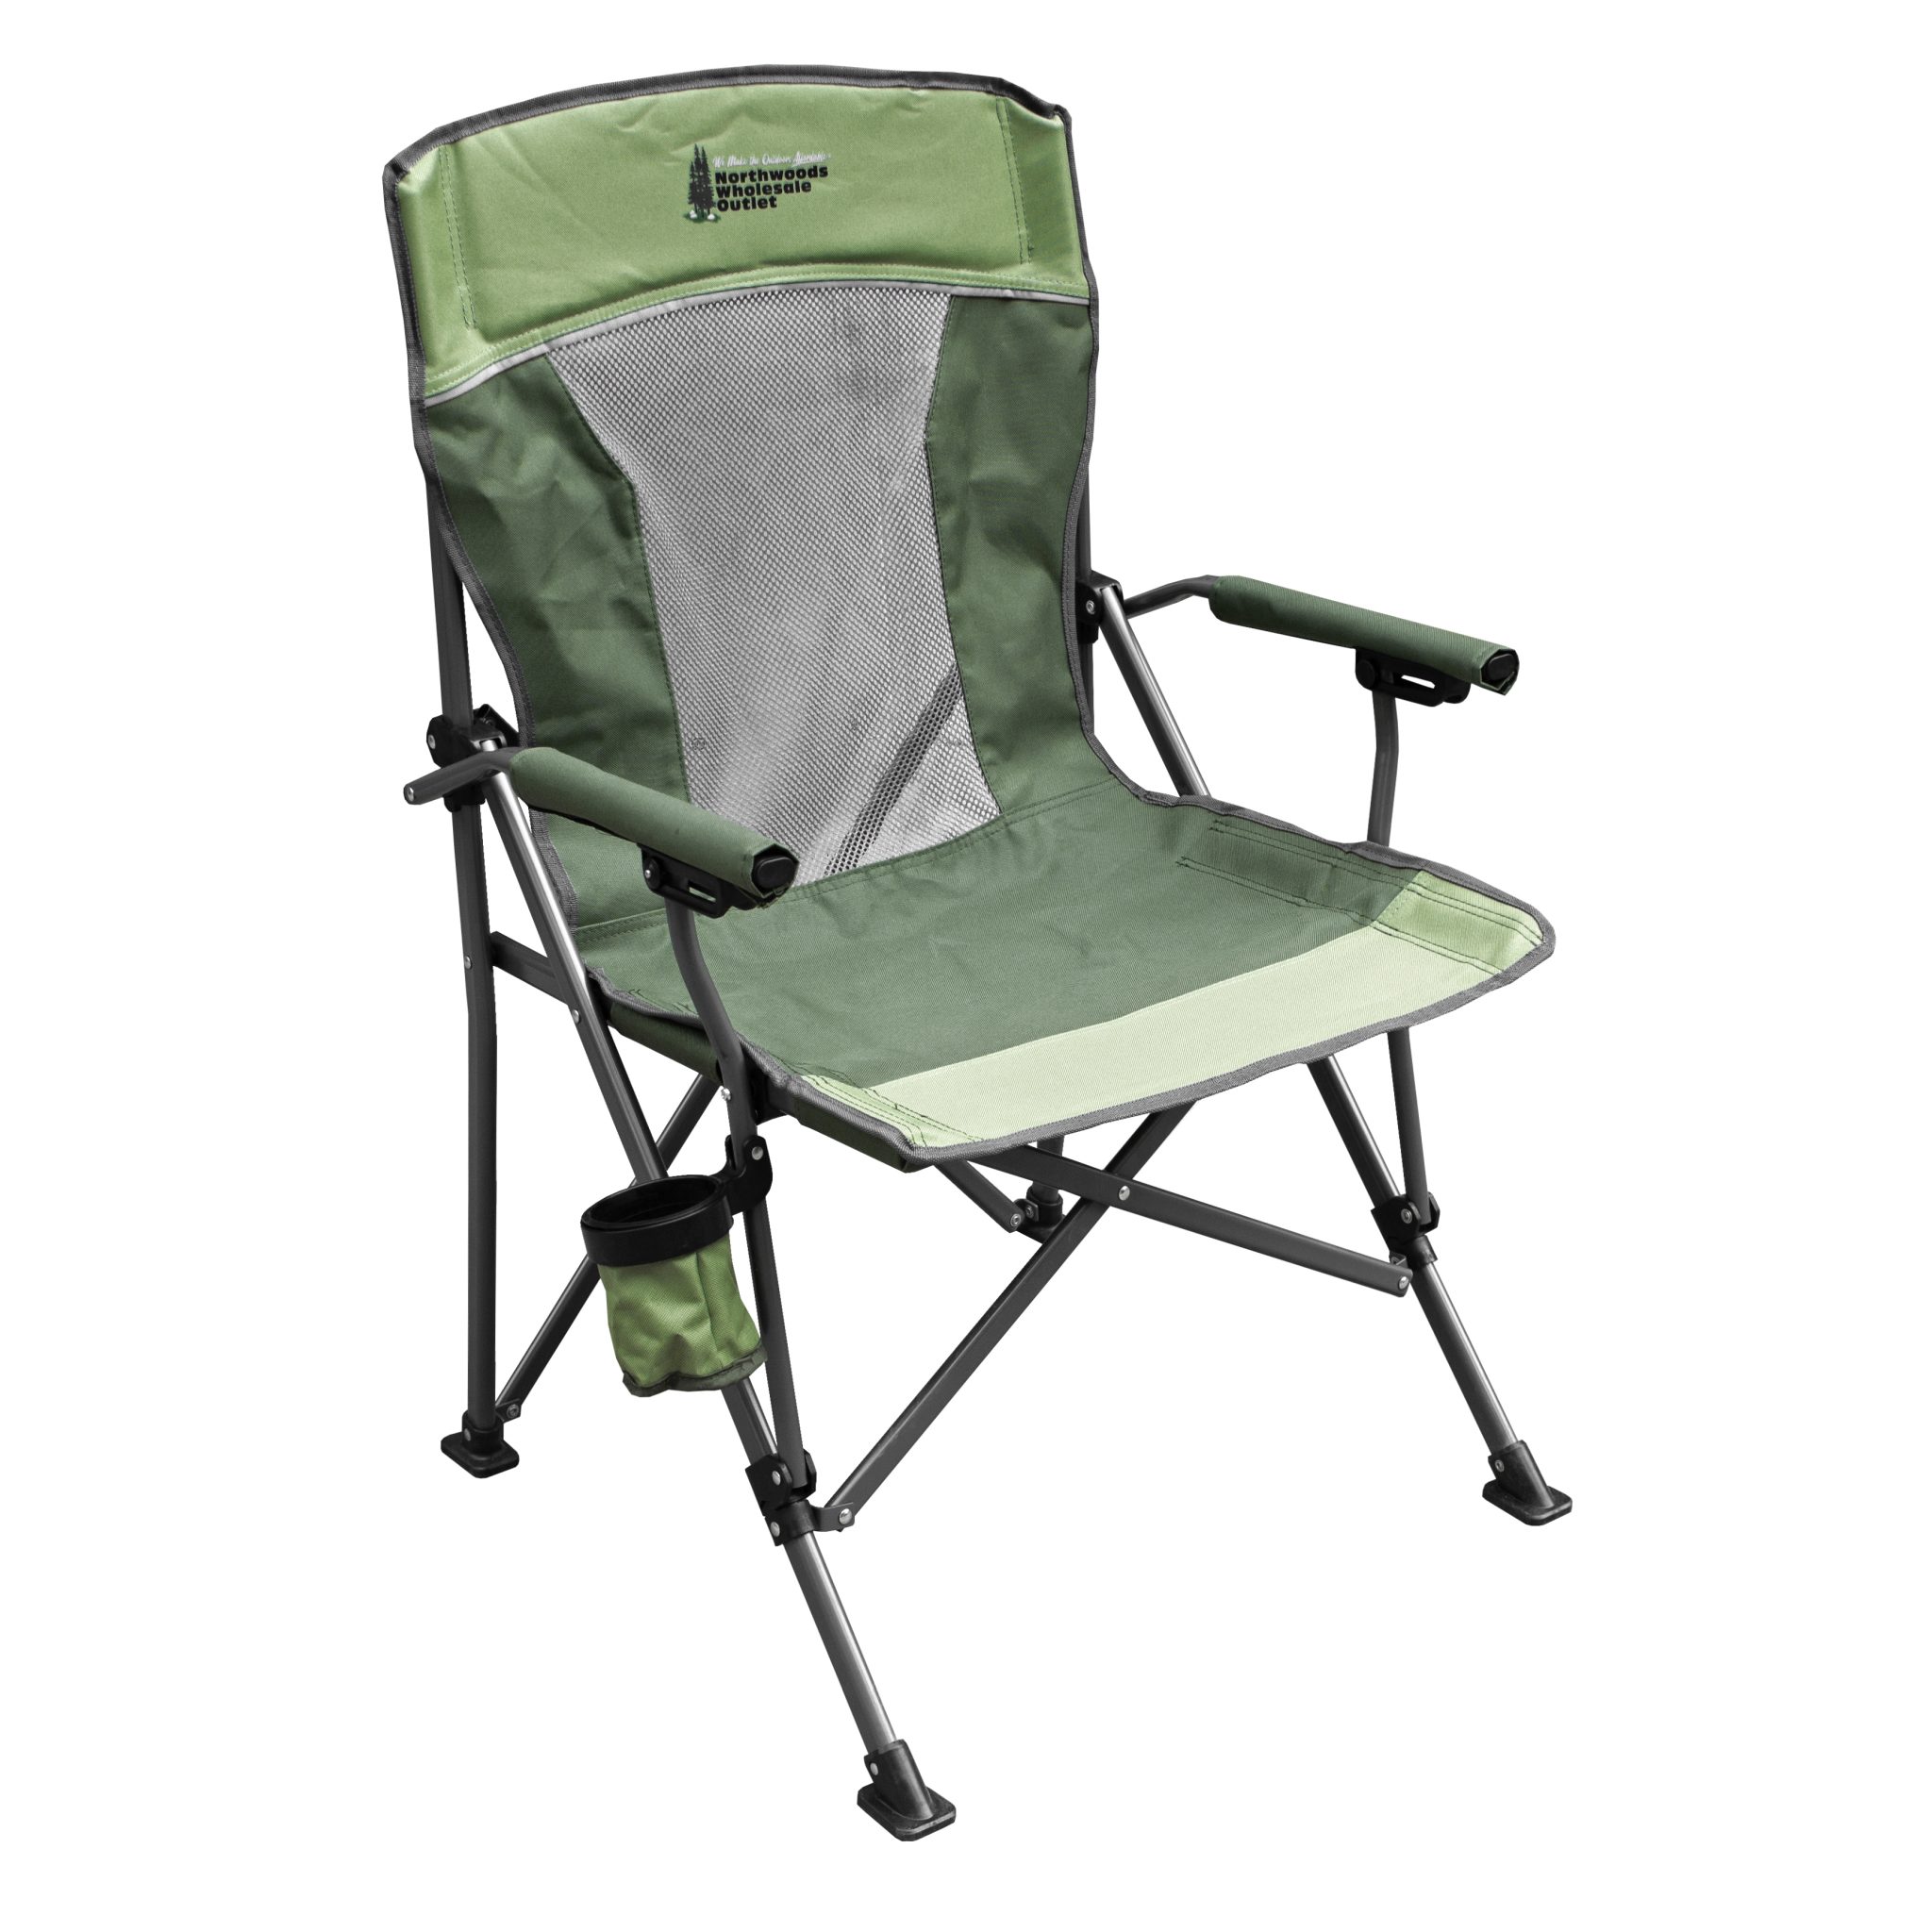 Camp Chairs Archives - Northwoods Wholesale Outlet